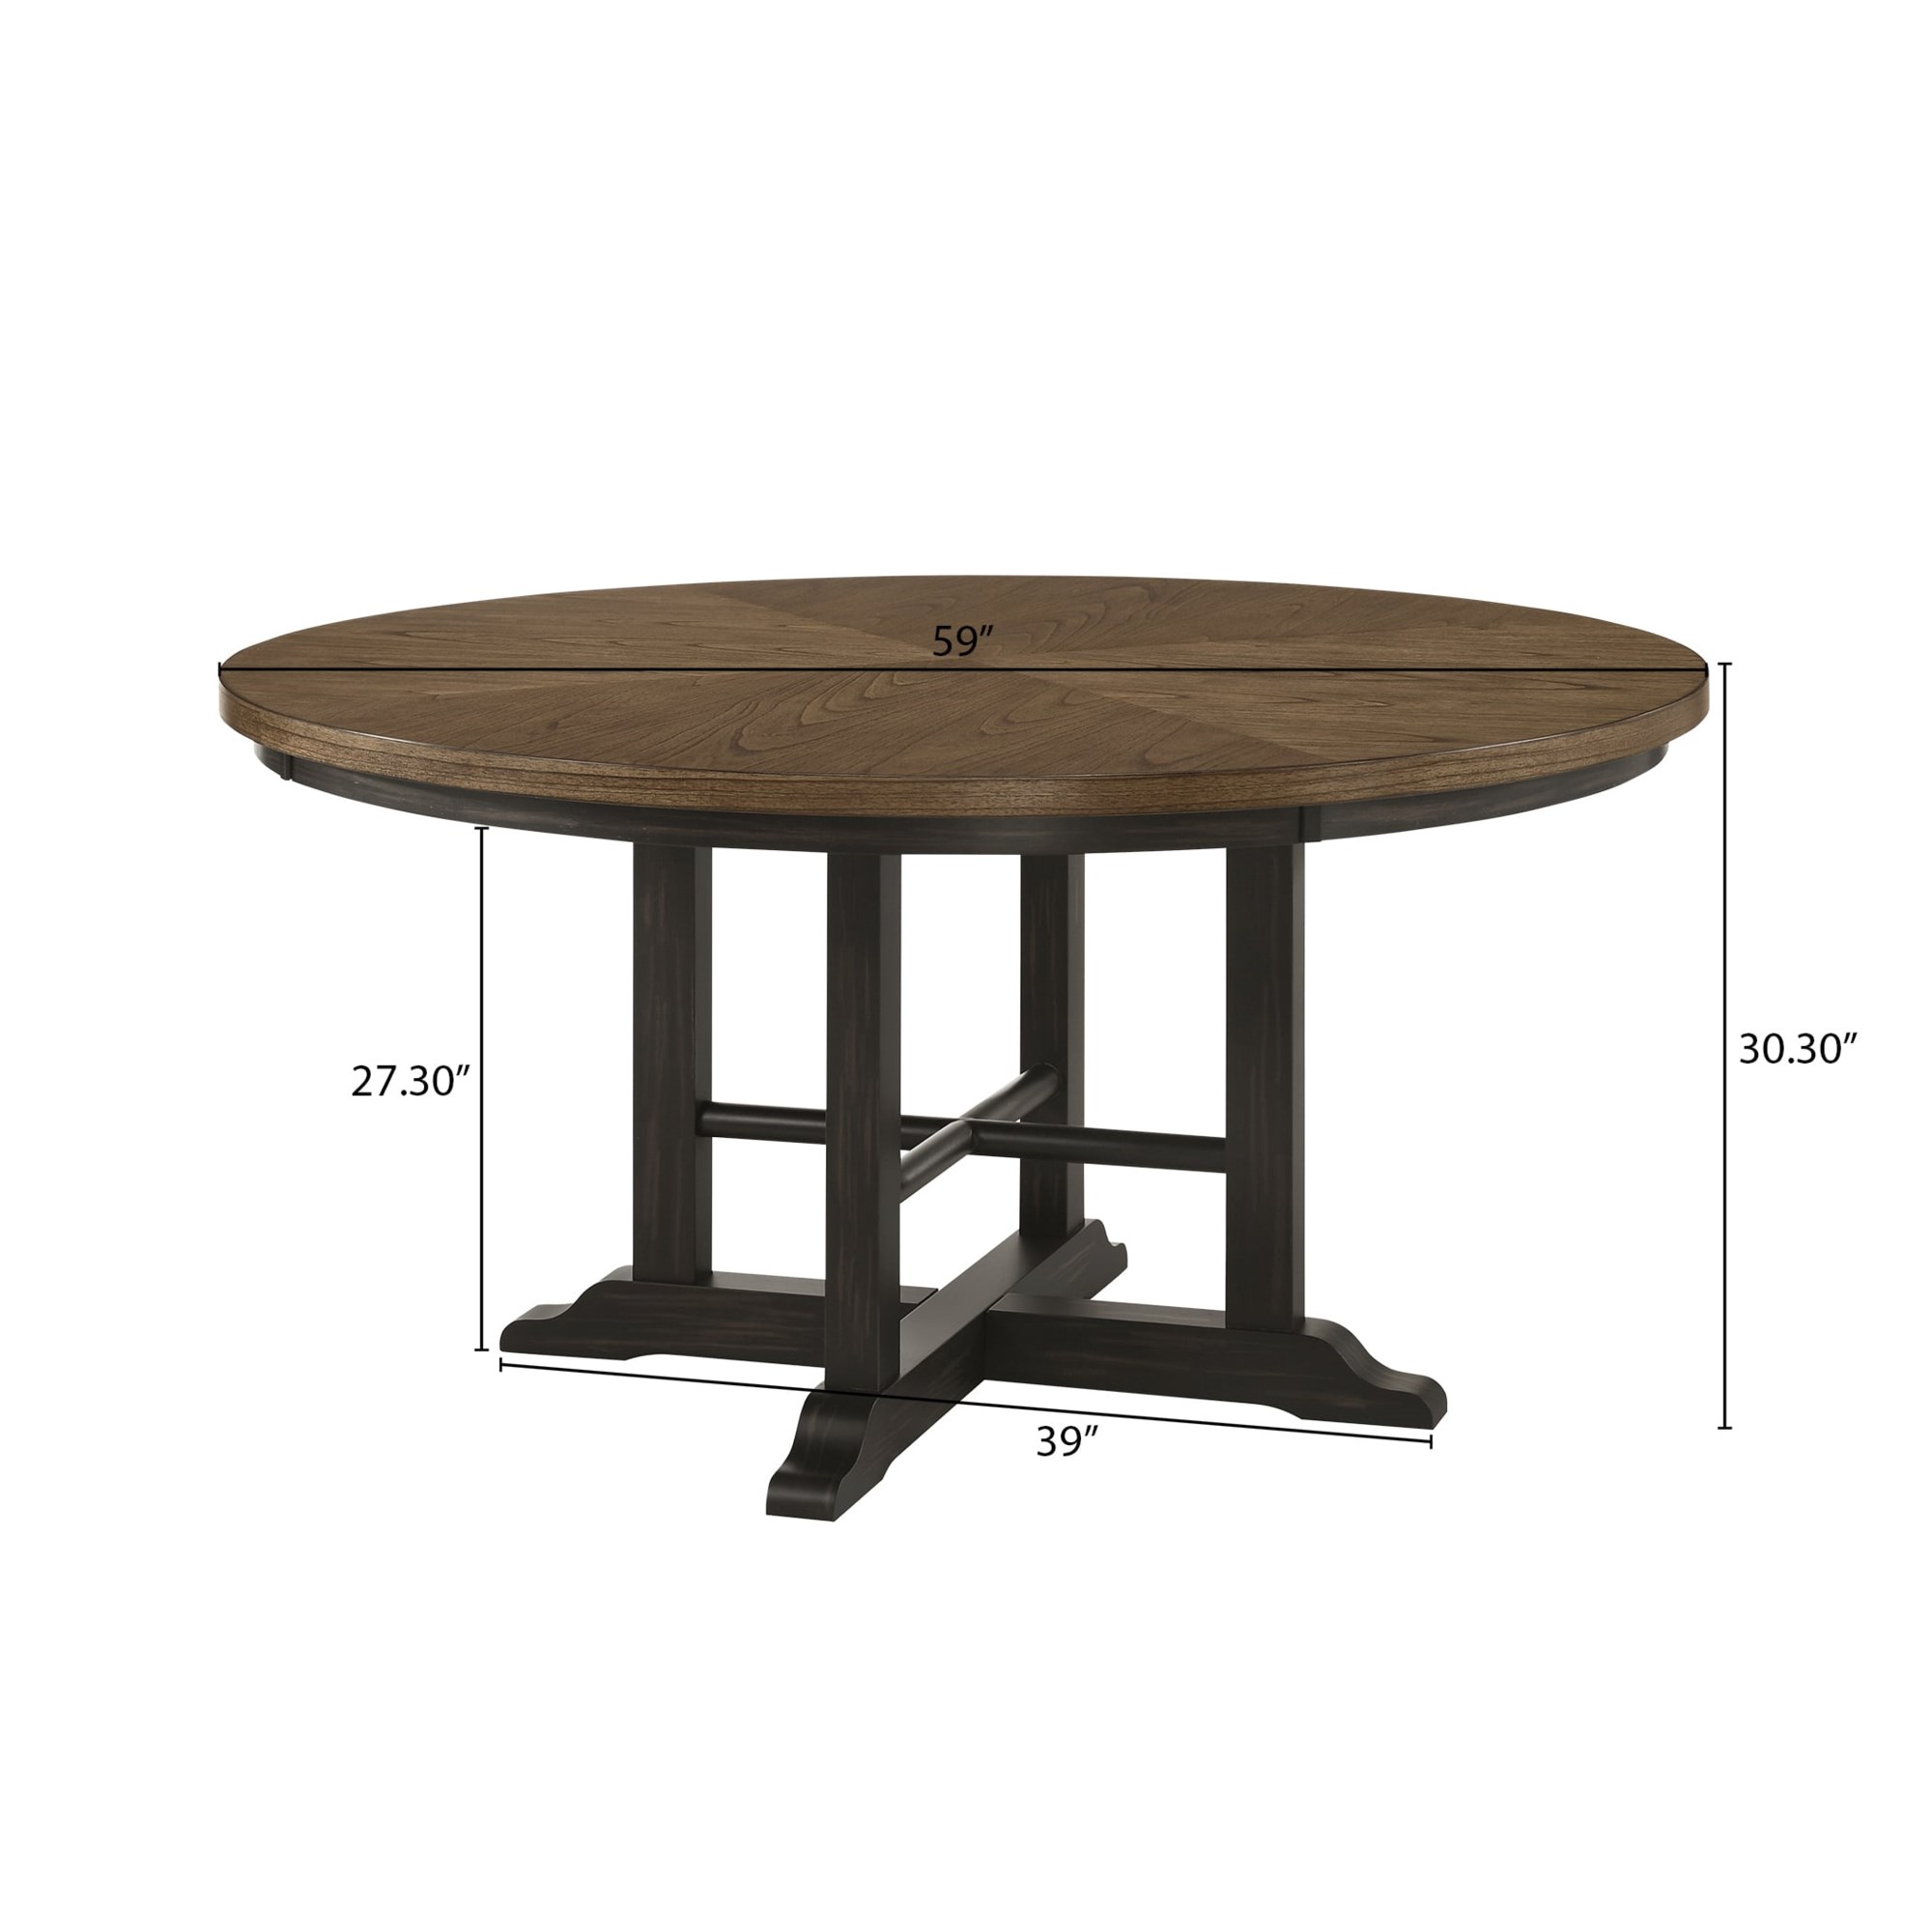 Crown Mark Hilara 2134T-4280 Transitional Dining Table with 18